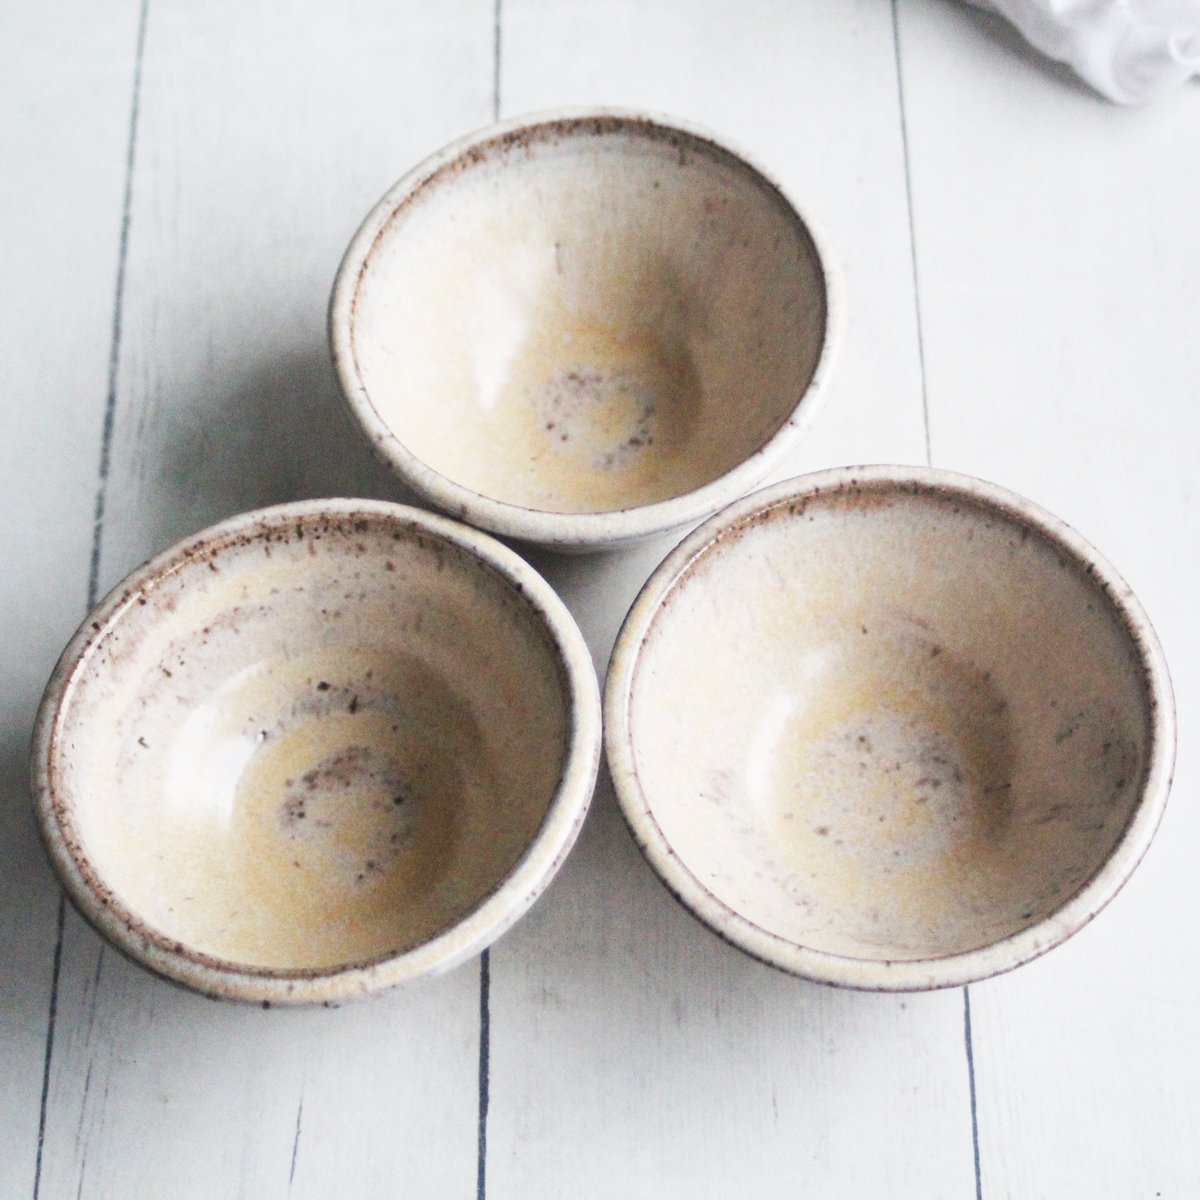 Andover Pottery — Three Rustic Prep Bowls in Milk and Honey Glaze,  Handcrafted Small Bowls, Made in the USA